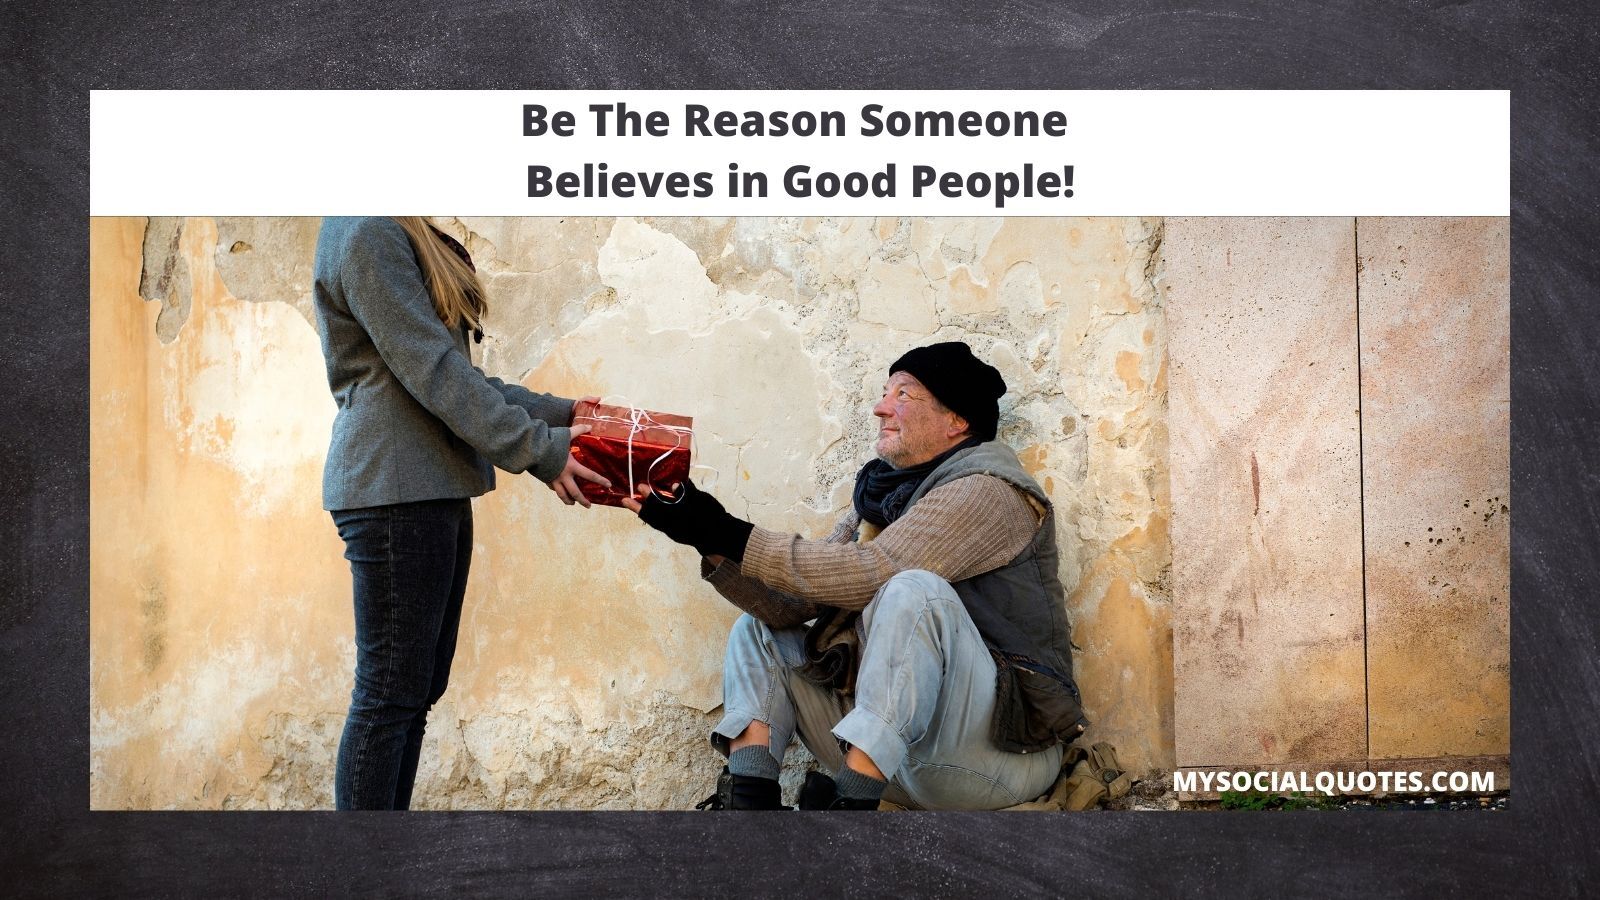 Be The Reason Someone Believes in Good People